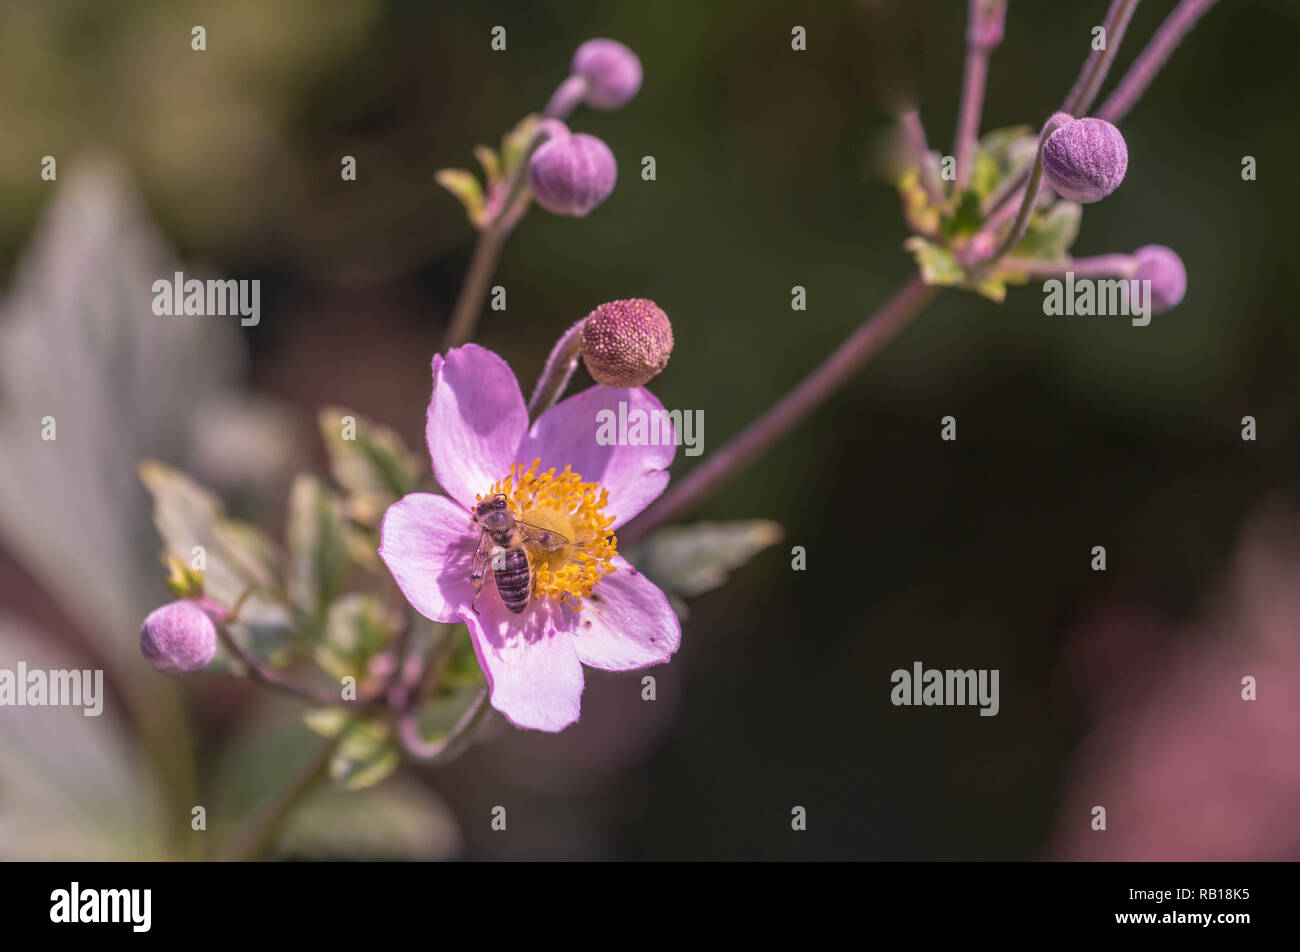 Color outdoor floral image of a blooming pink autumn anemone,  buds,sunny summer,natural blurred green background,bee sitting on the blossom Stock Photo